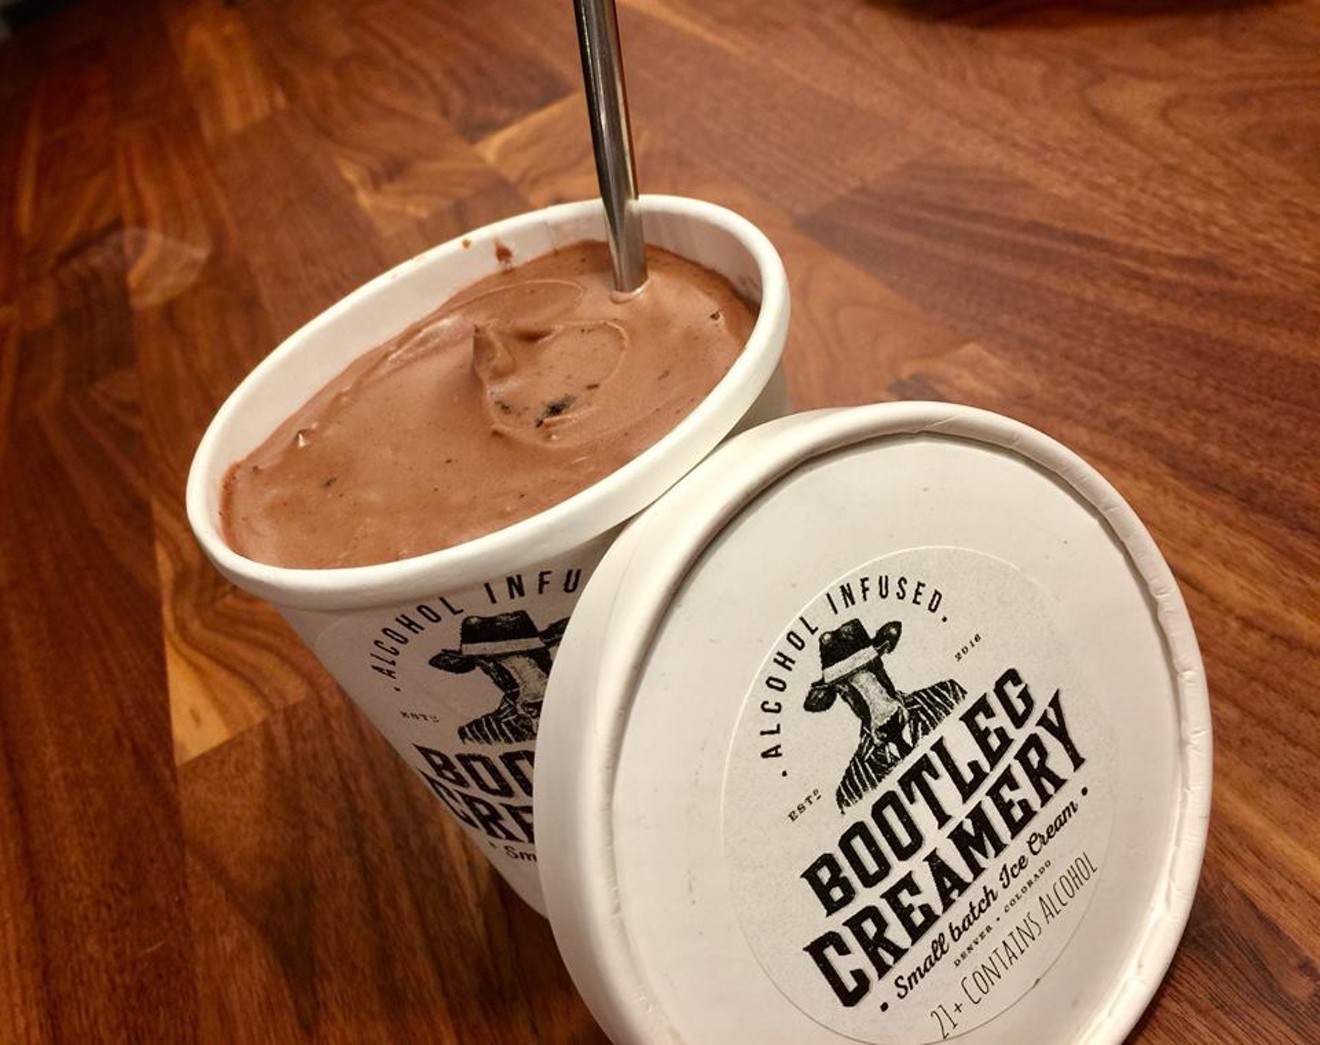 Bootleg Creamery's boozy ice cream is making its way to liquor-store shelves all over Denver.